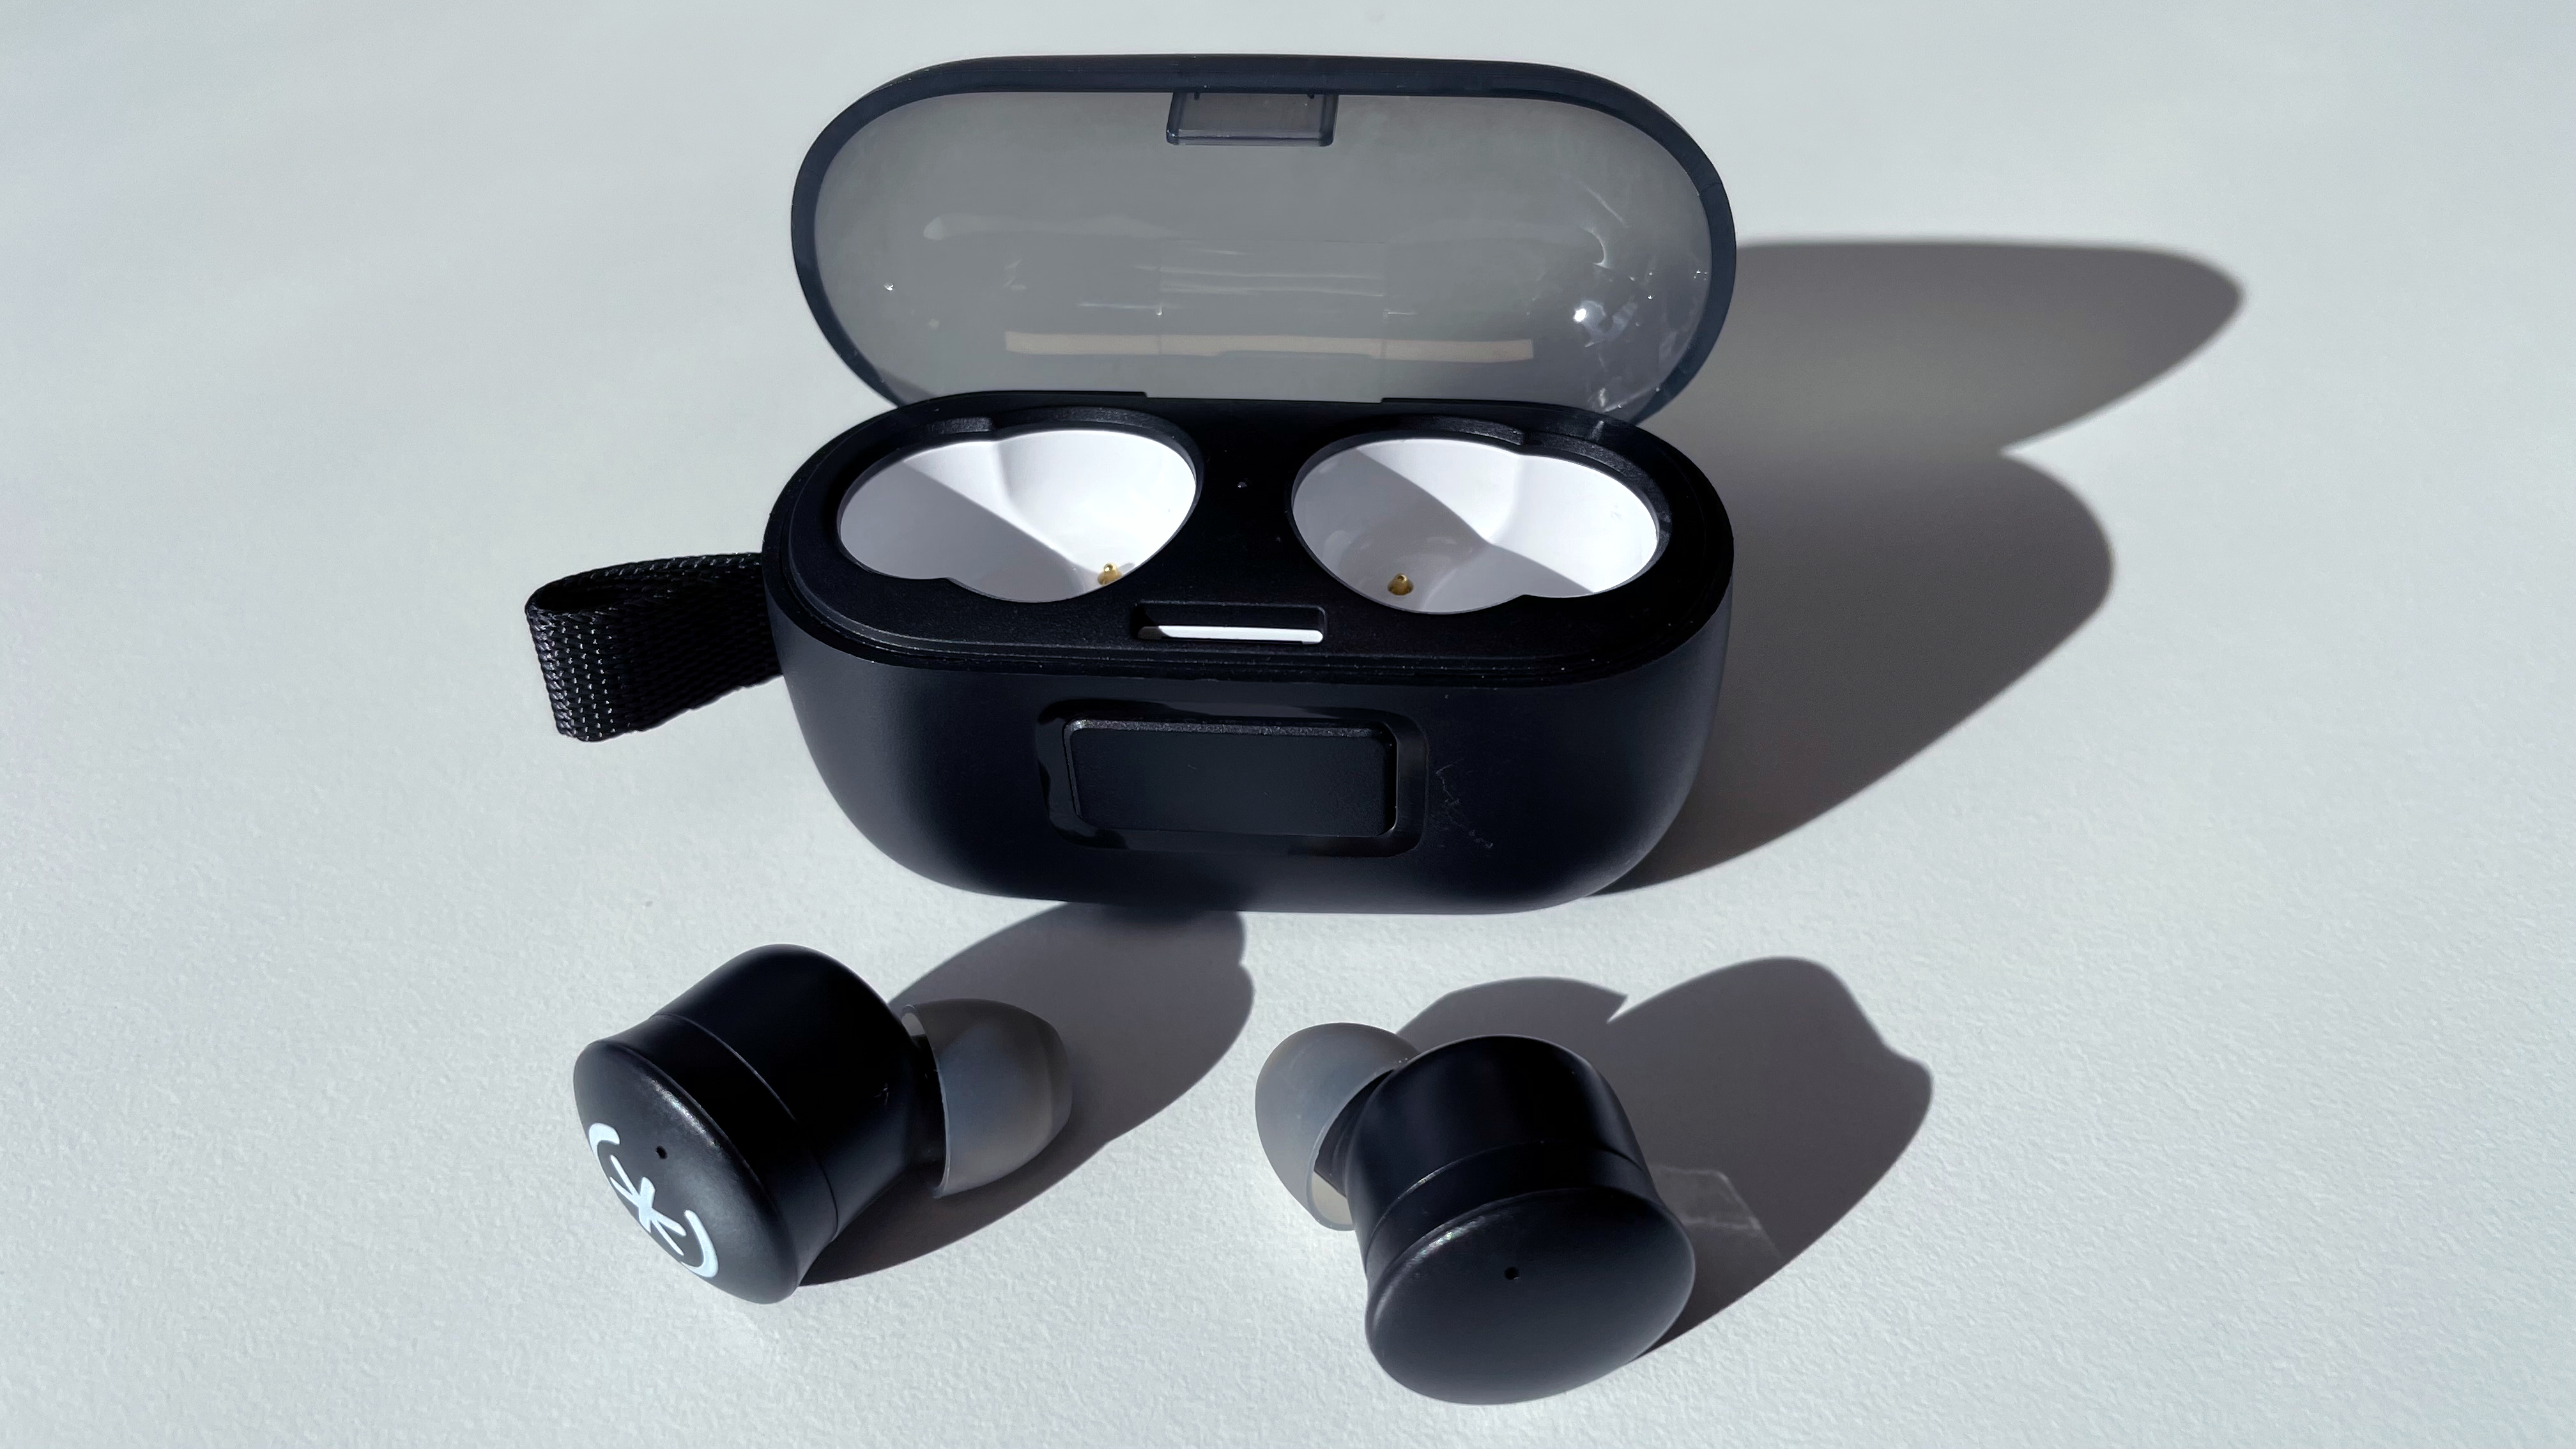 The speck Gemtones Play earbuds are pictured lying on a white tabletop in front of their charging case. The ear buds are black, with the left one having the Speck logo printed in white. The case is also black, with white inside the earbud cavities.